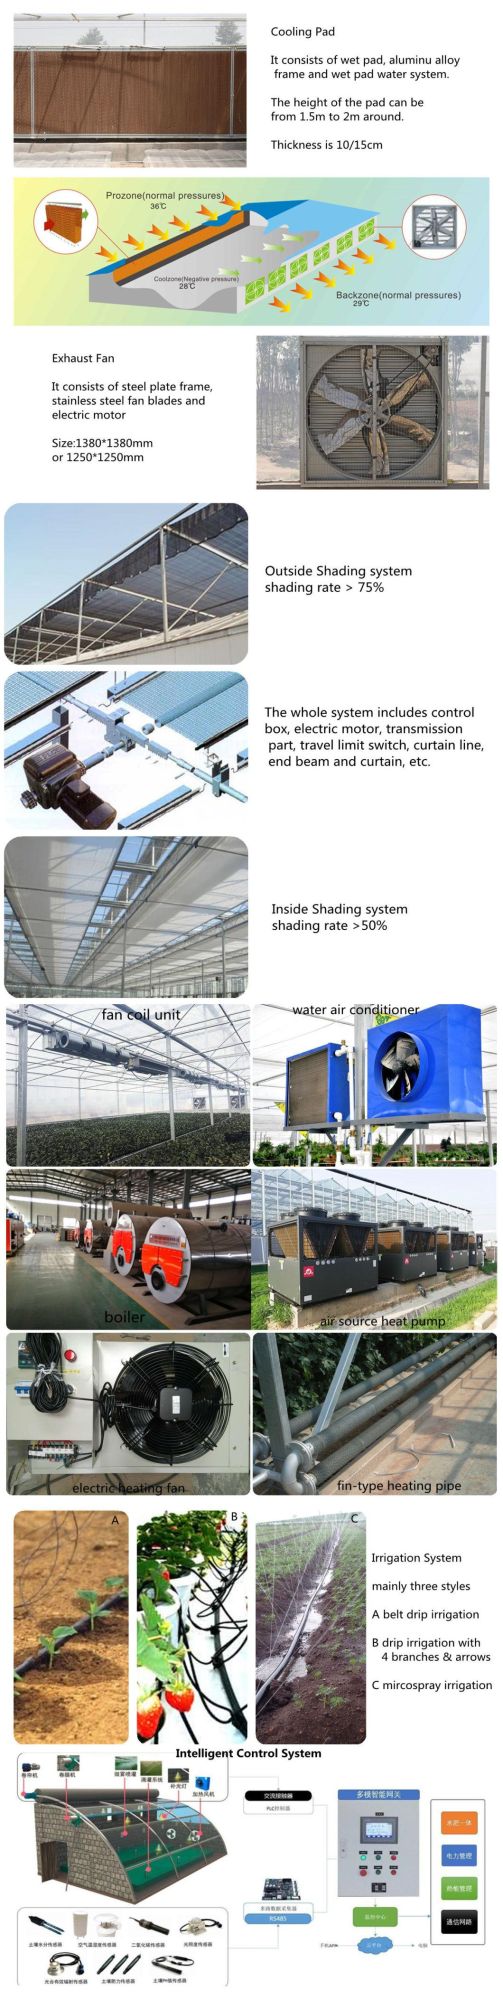 High Quality Lower Price Pneumatic Seedling Machine and Watering Station for Seedling Trays Sowing for Modern Agriculture